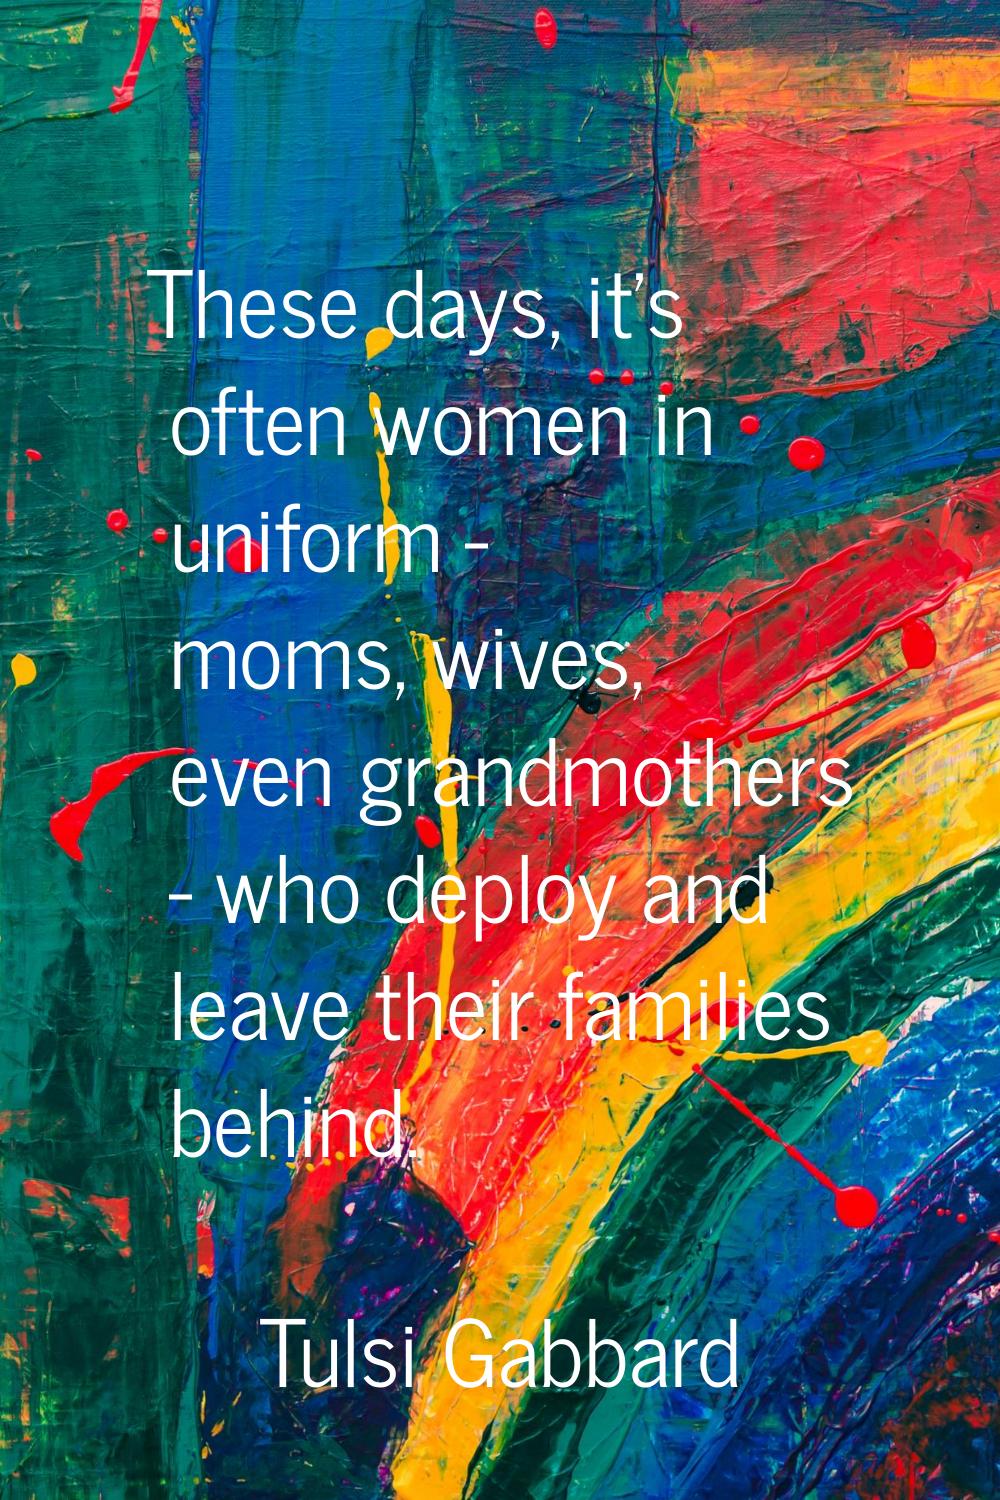 These days, it's often women in uniform - moms, wives, even grandmothers - who deploy and leave the